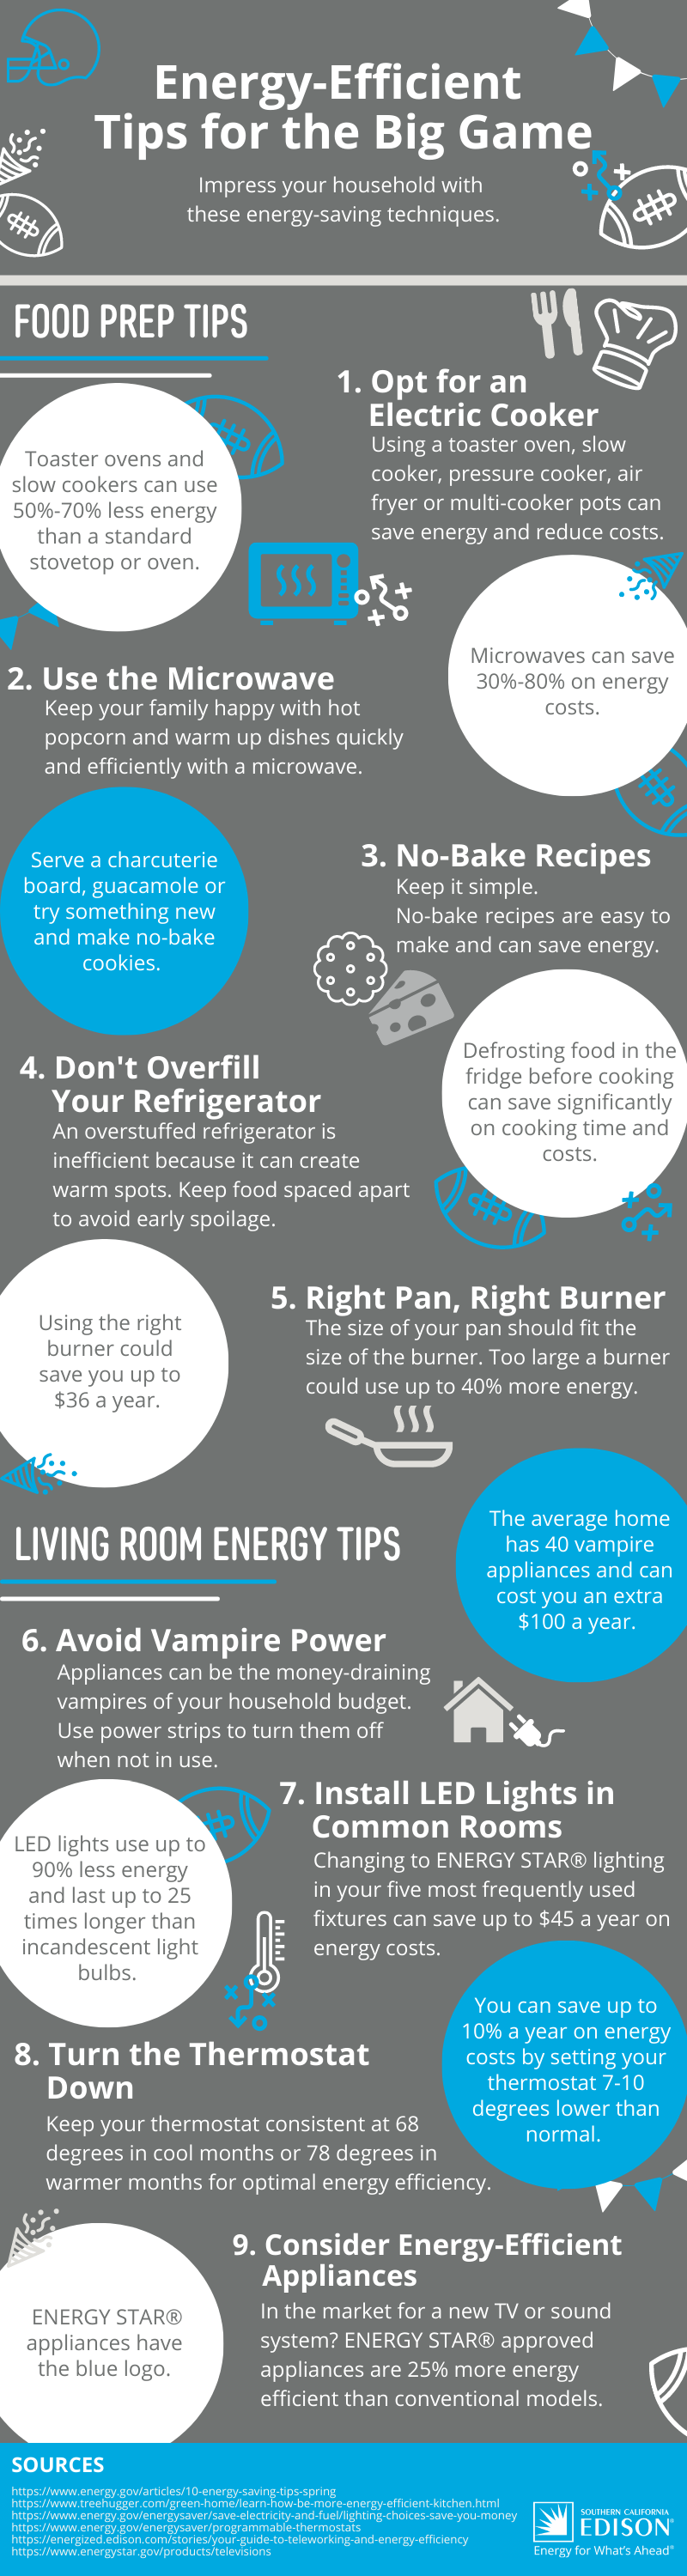 Energy Efficiency tips for the big game